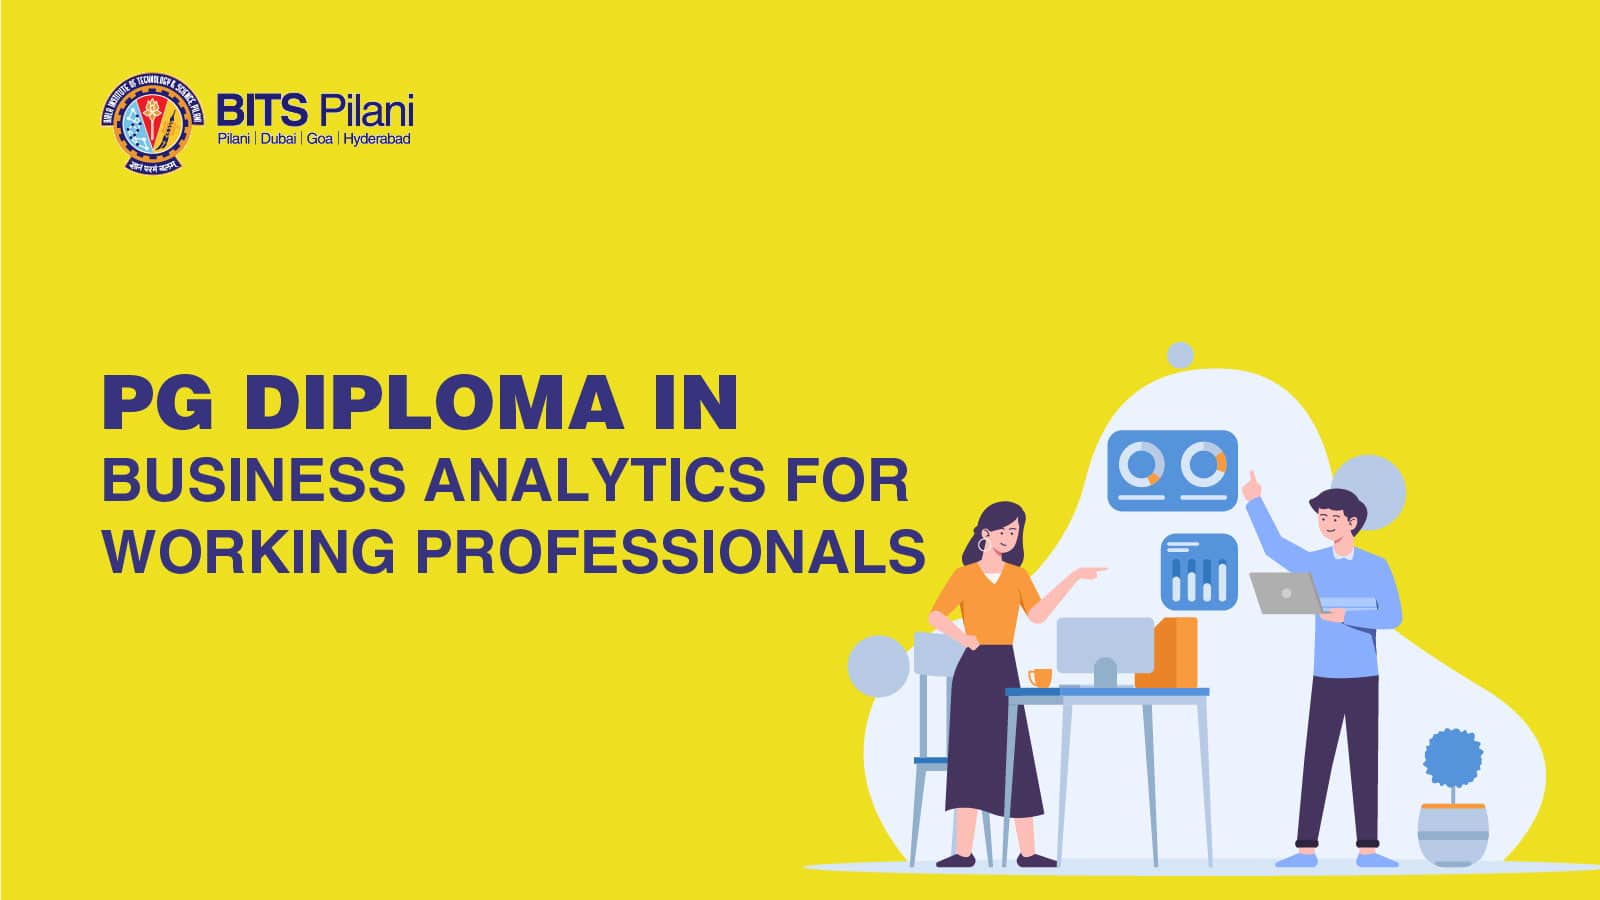 Why Working Professionals Must Learn Business Analytics